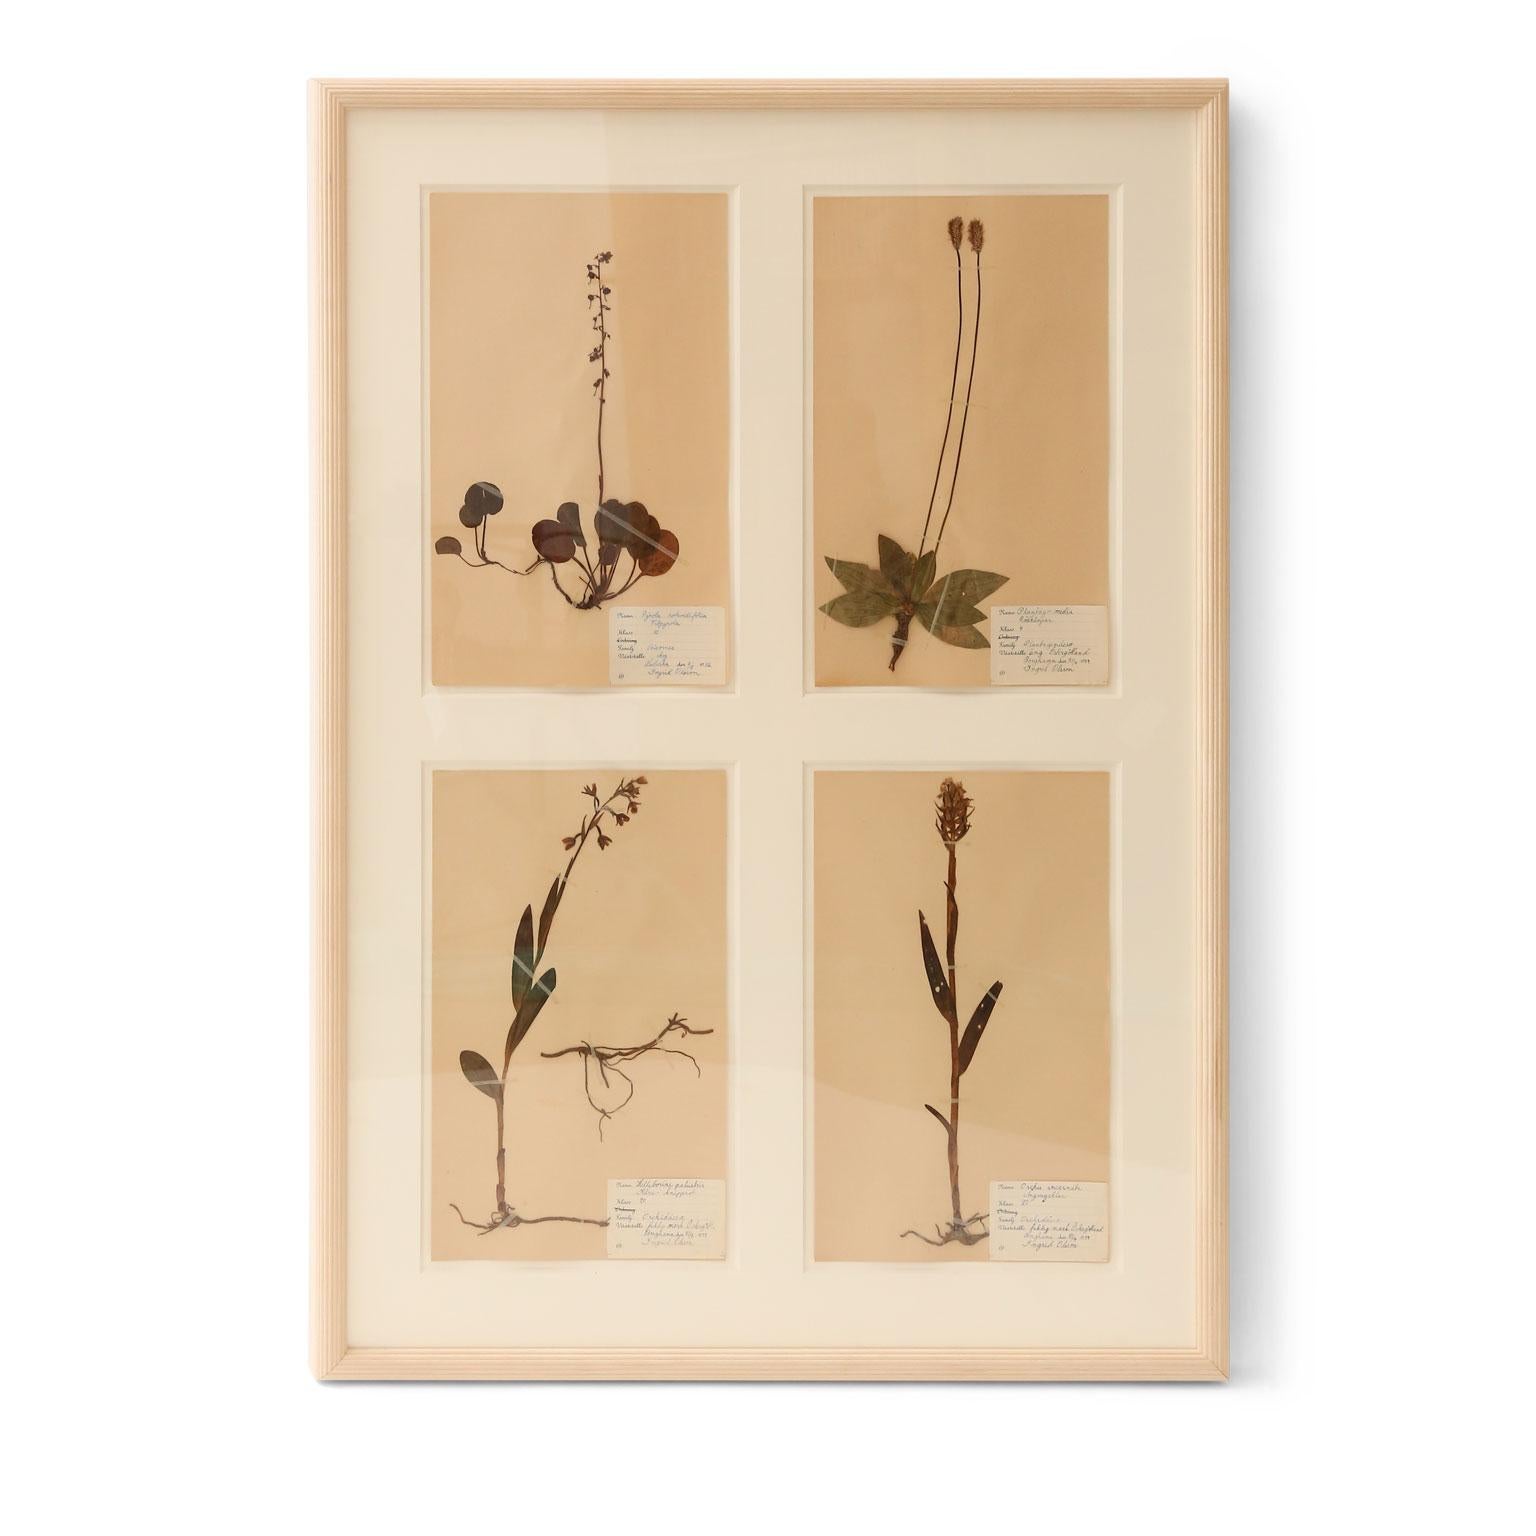 Framed set of four vintage herbaria (circa 1930-1949, Sweden). Each herbarium (botanical) measures 15.75 inches high x 9.5 inches wide and floats within a cut mat window. The set of four is framed in unfinished reeded wood. Two framed sets are